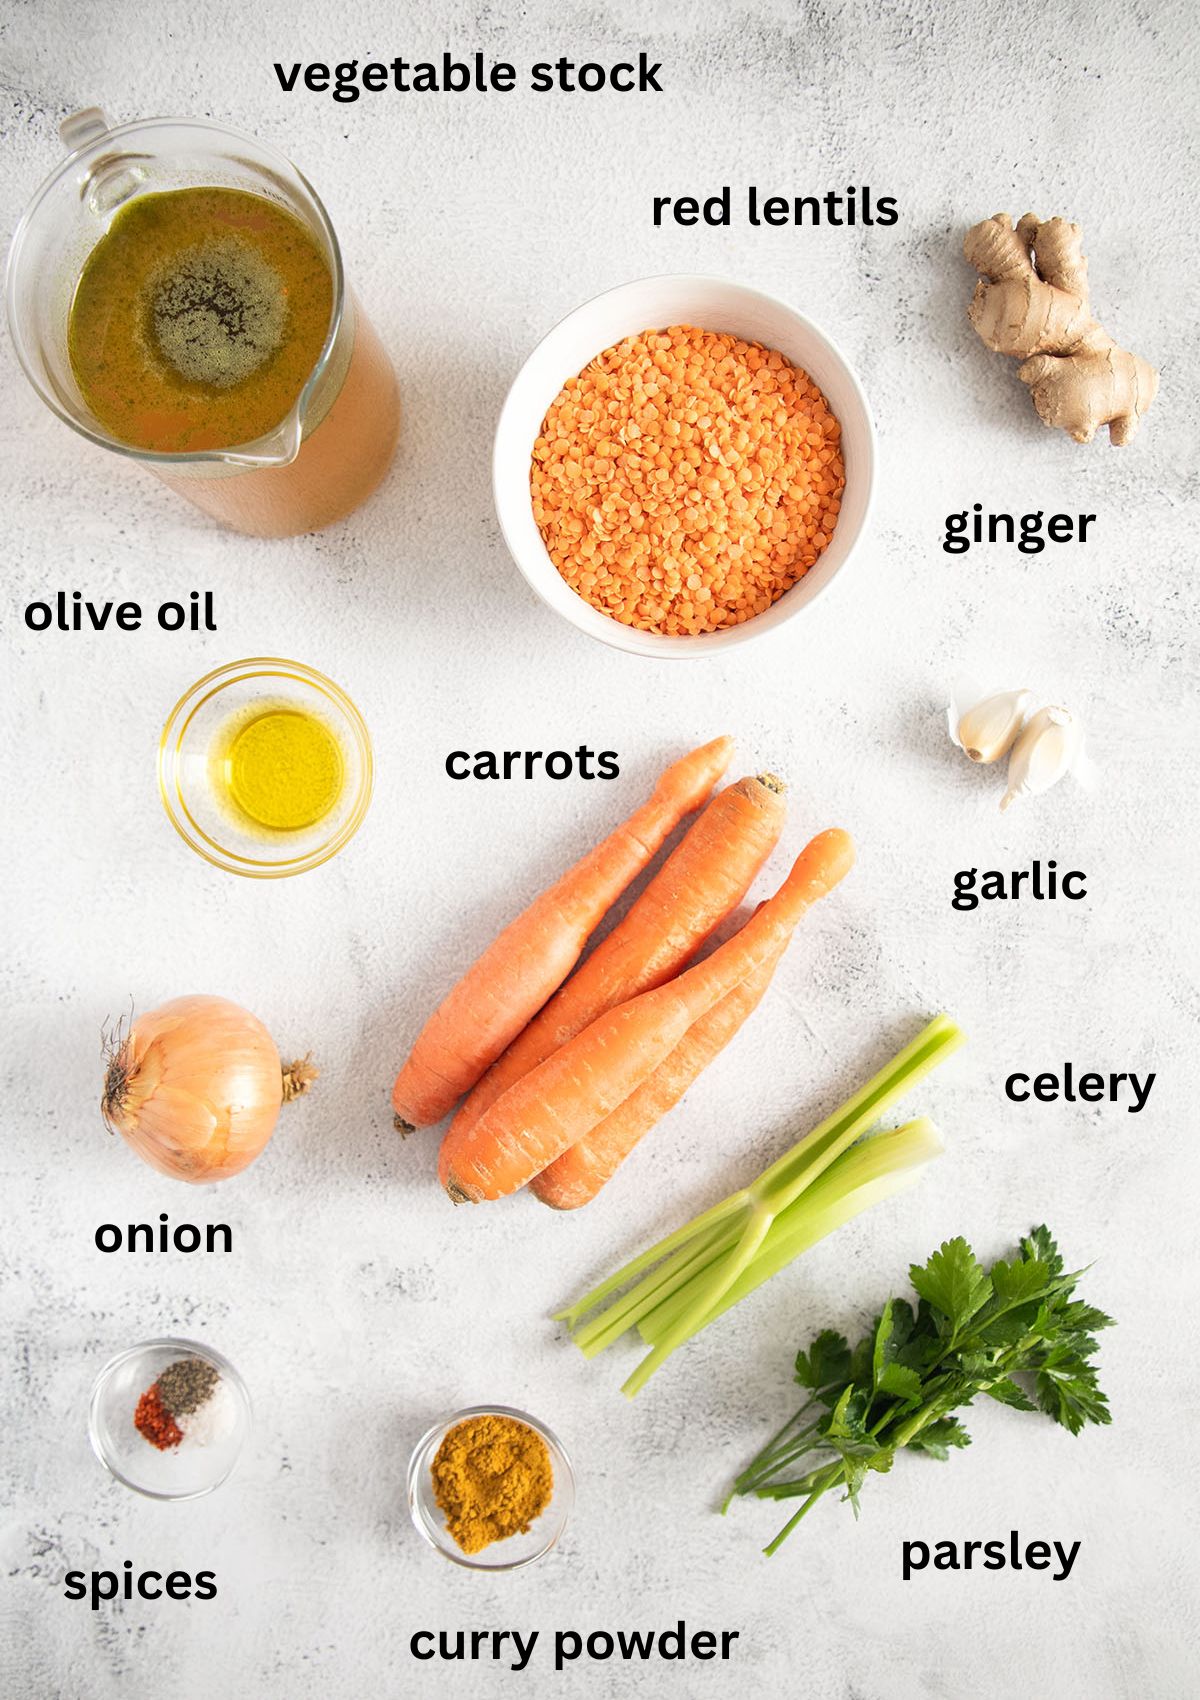 listed ingredients for making soup with carrots, lentils, ginger and curry powder.